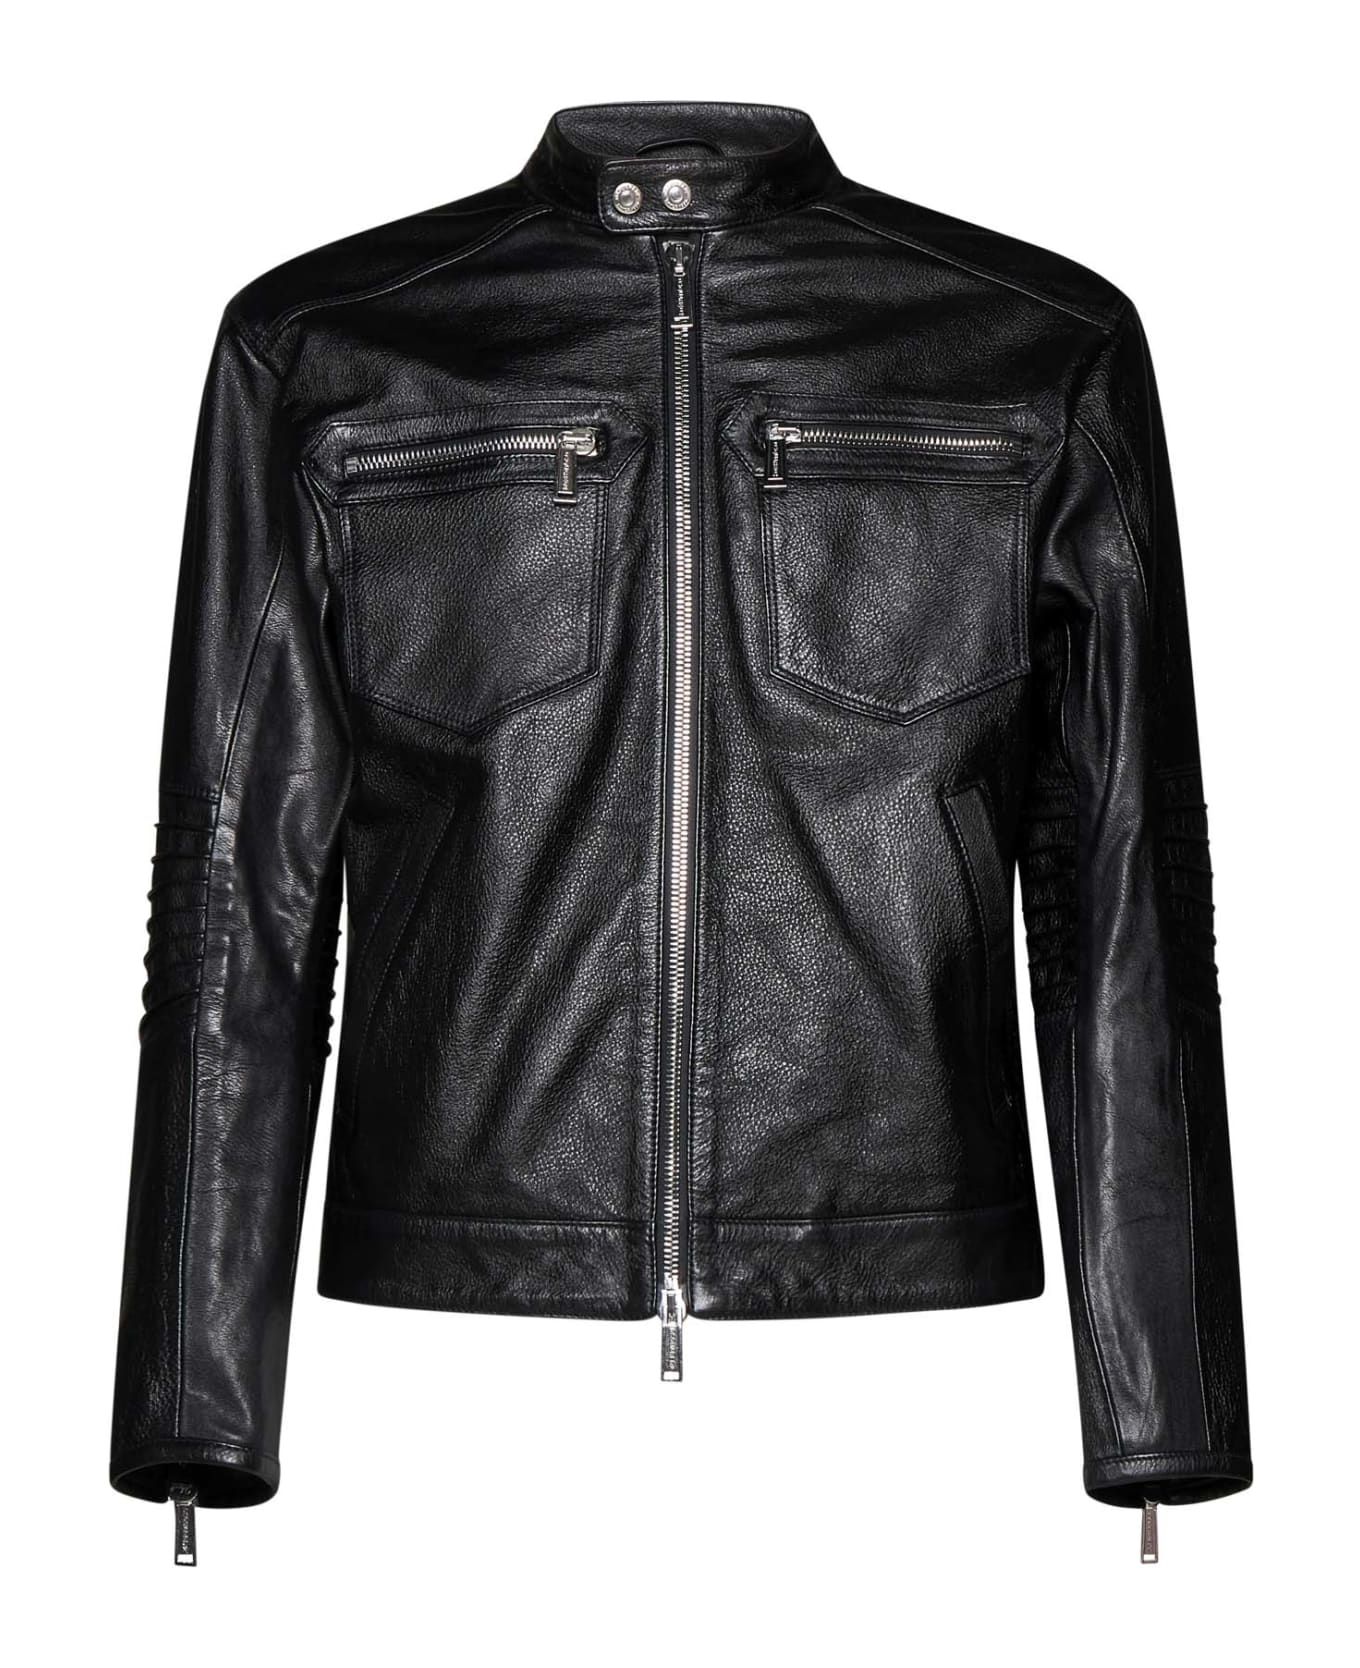 Dsquared2 Jacket - Col. 900 [090]